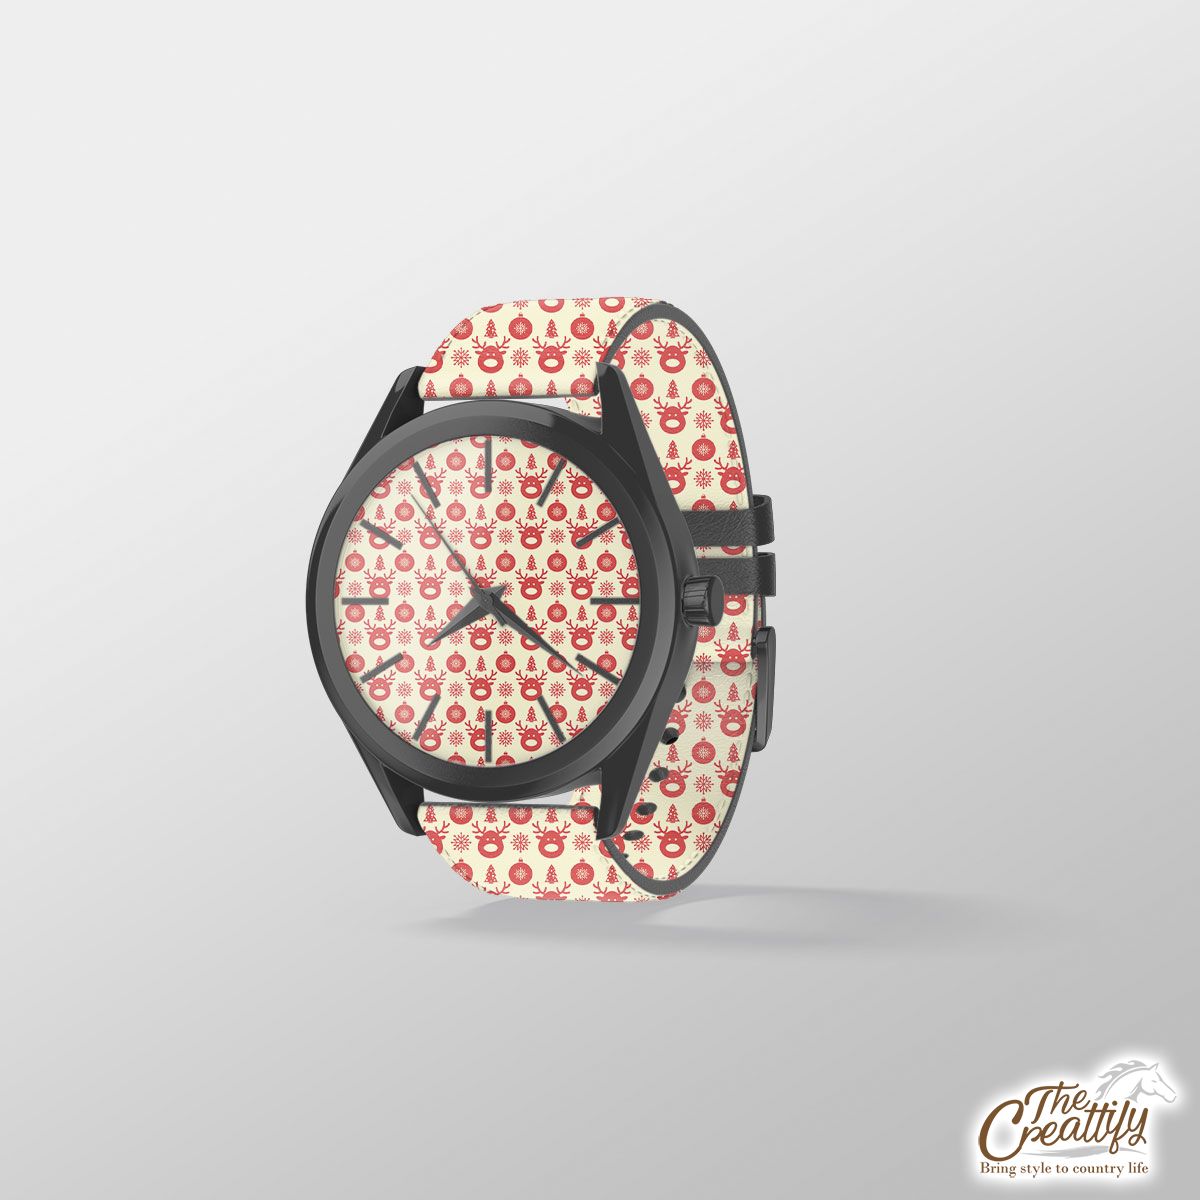 Red And Light Yellow Reindeer, Christmas Ball, Snowflakes Print Watch